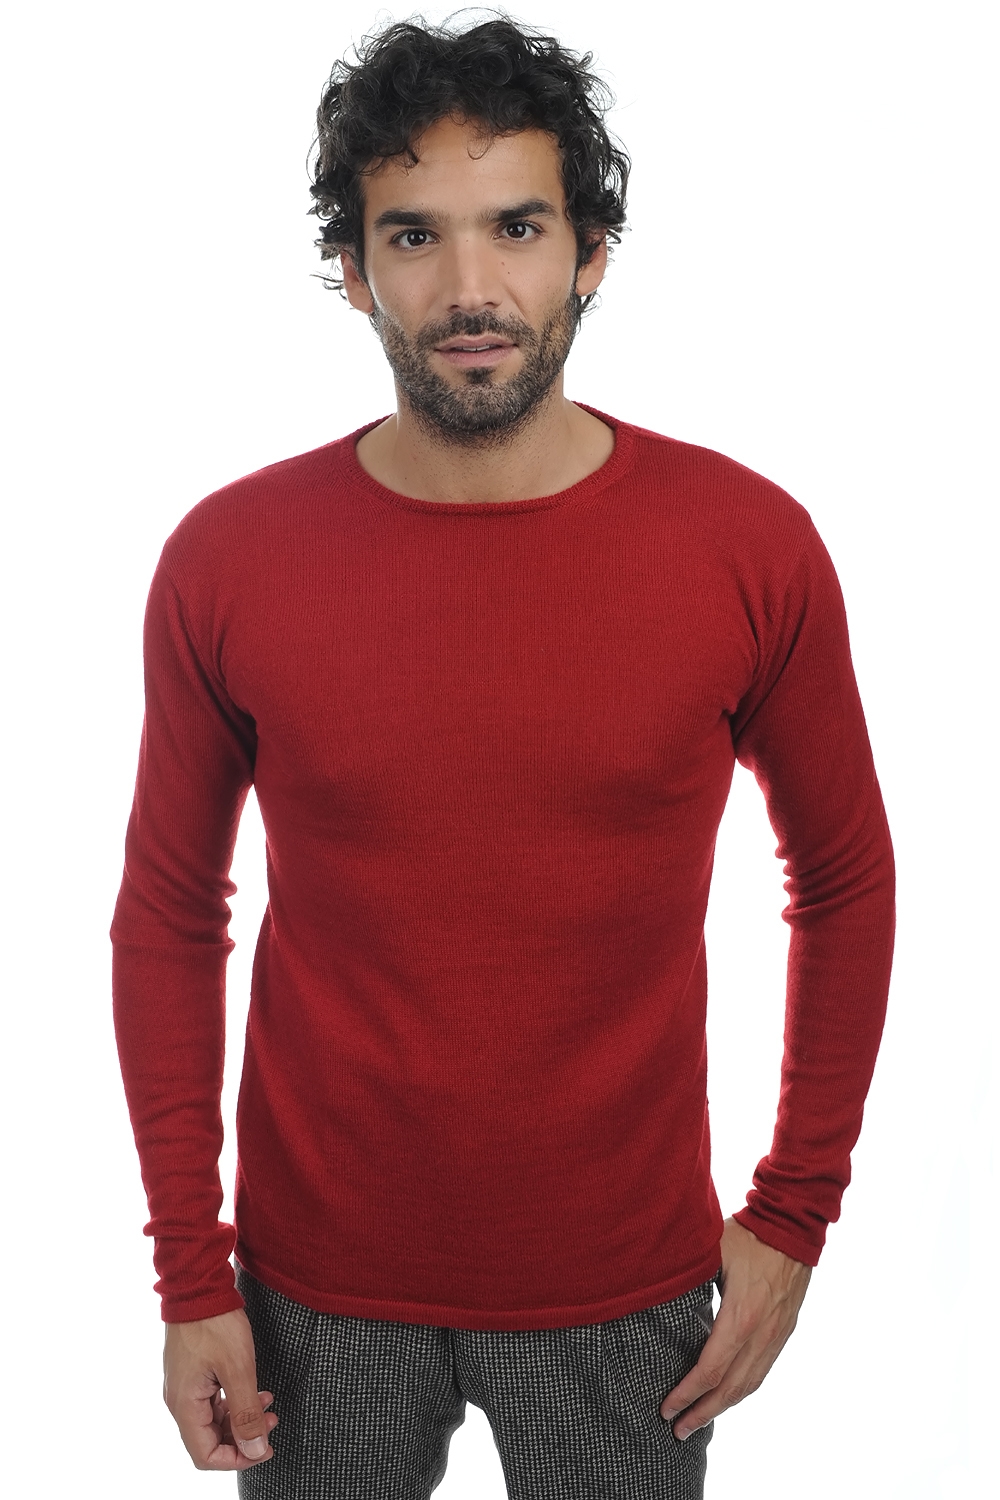 Baby Alpaga pull homme col rond christian rouge m